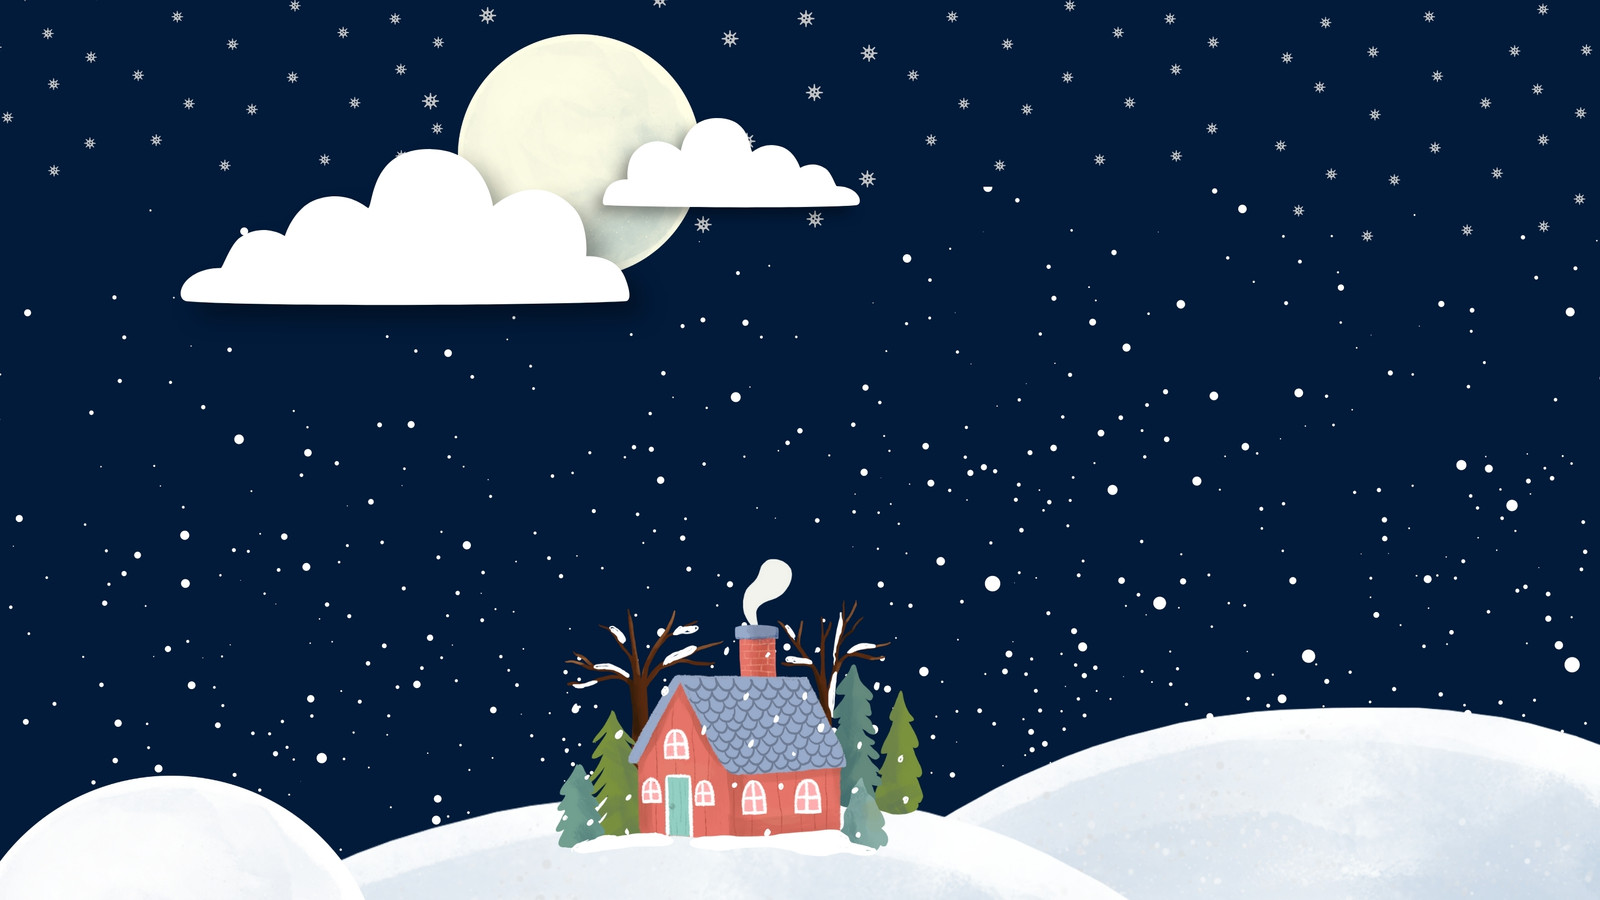 Page 9 - Free and customizable snow templates